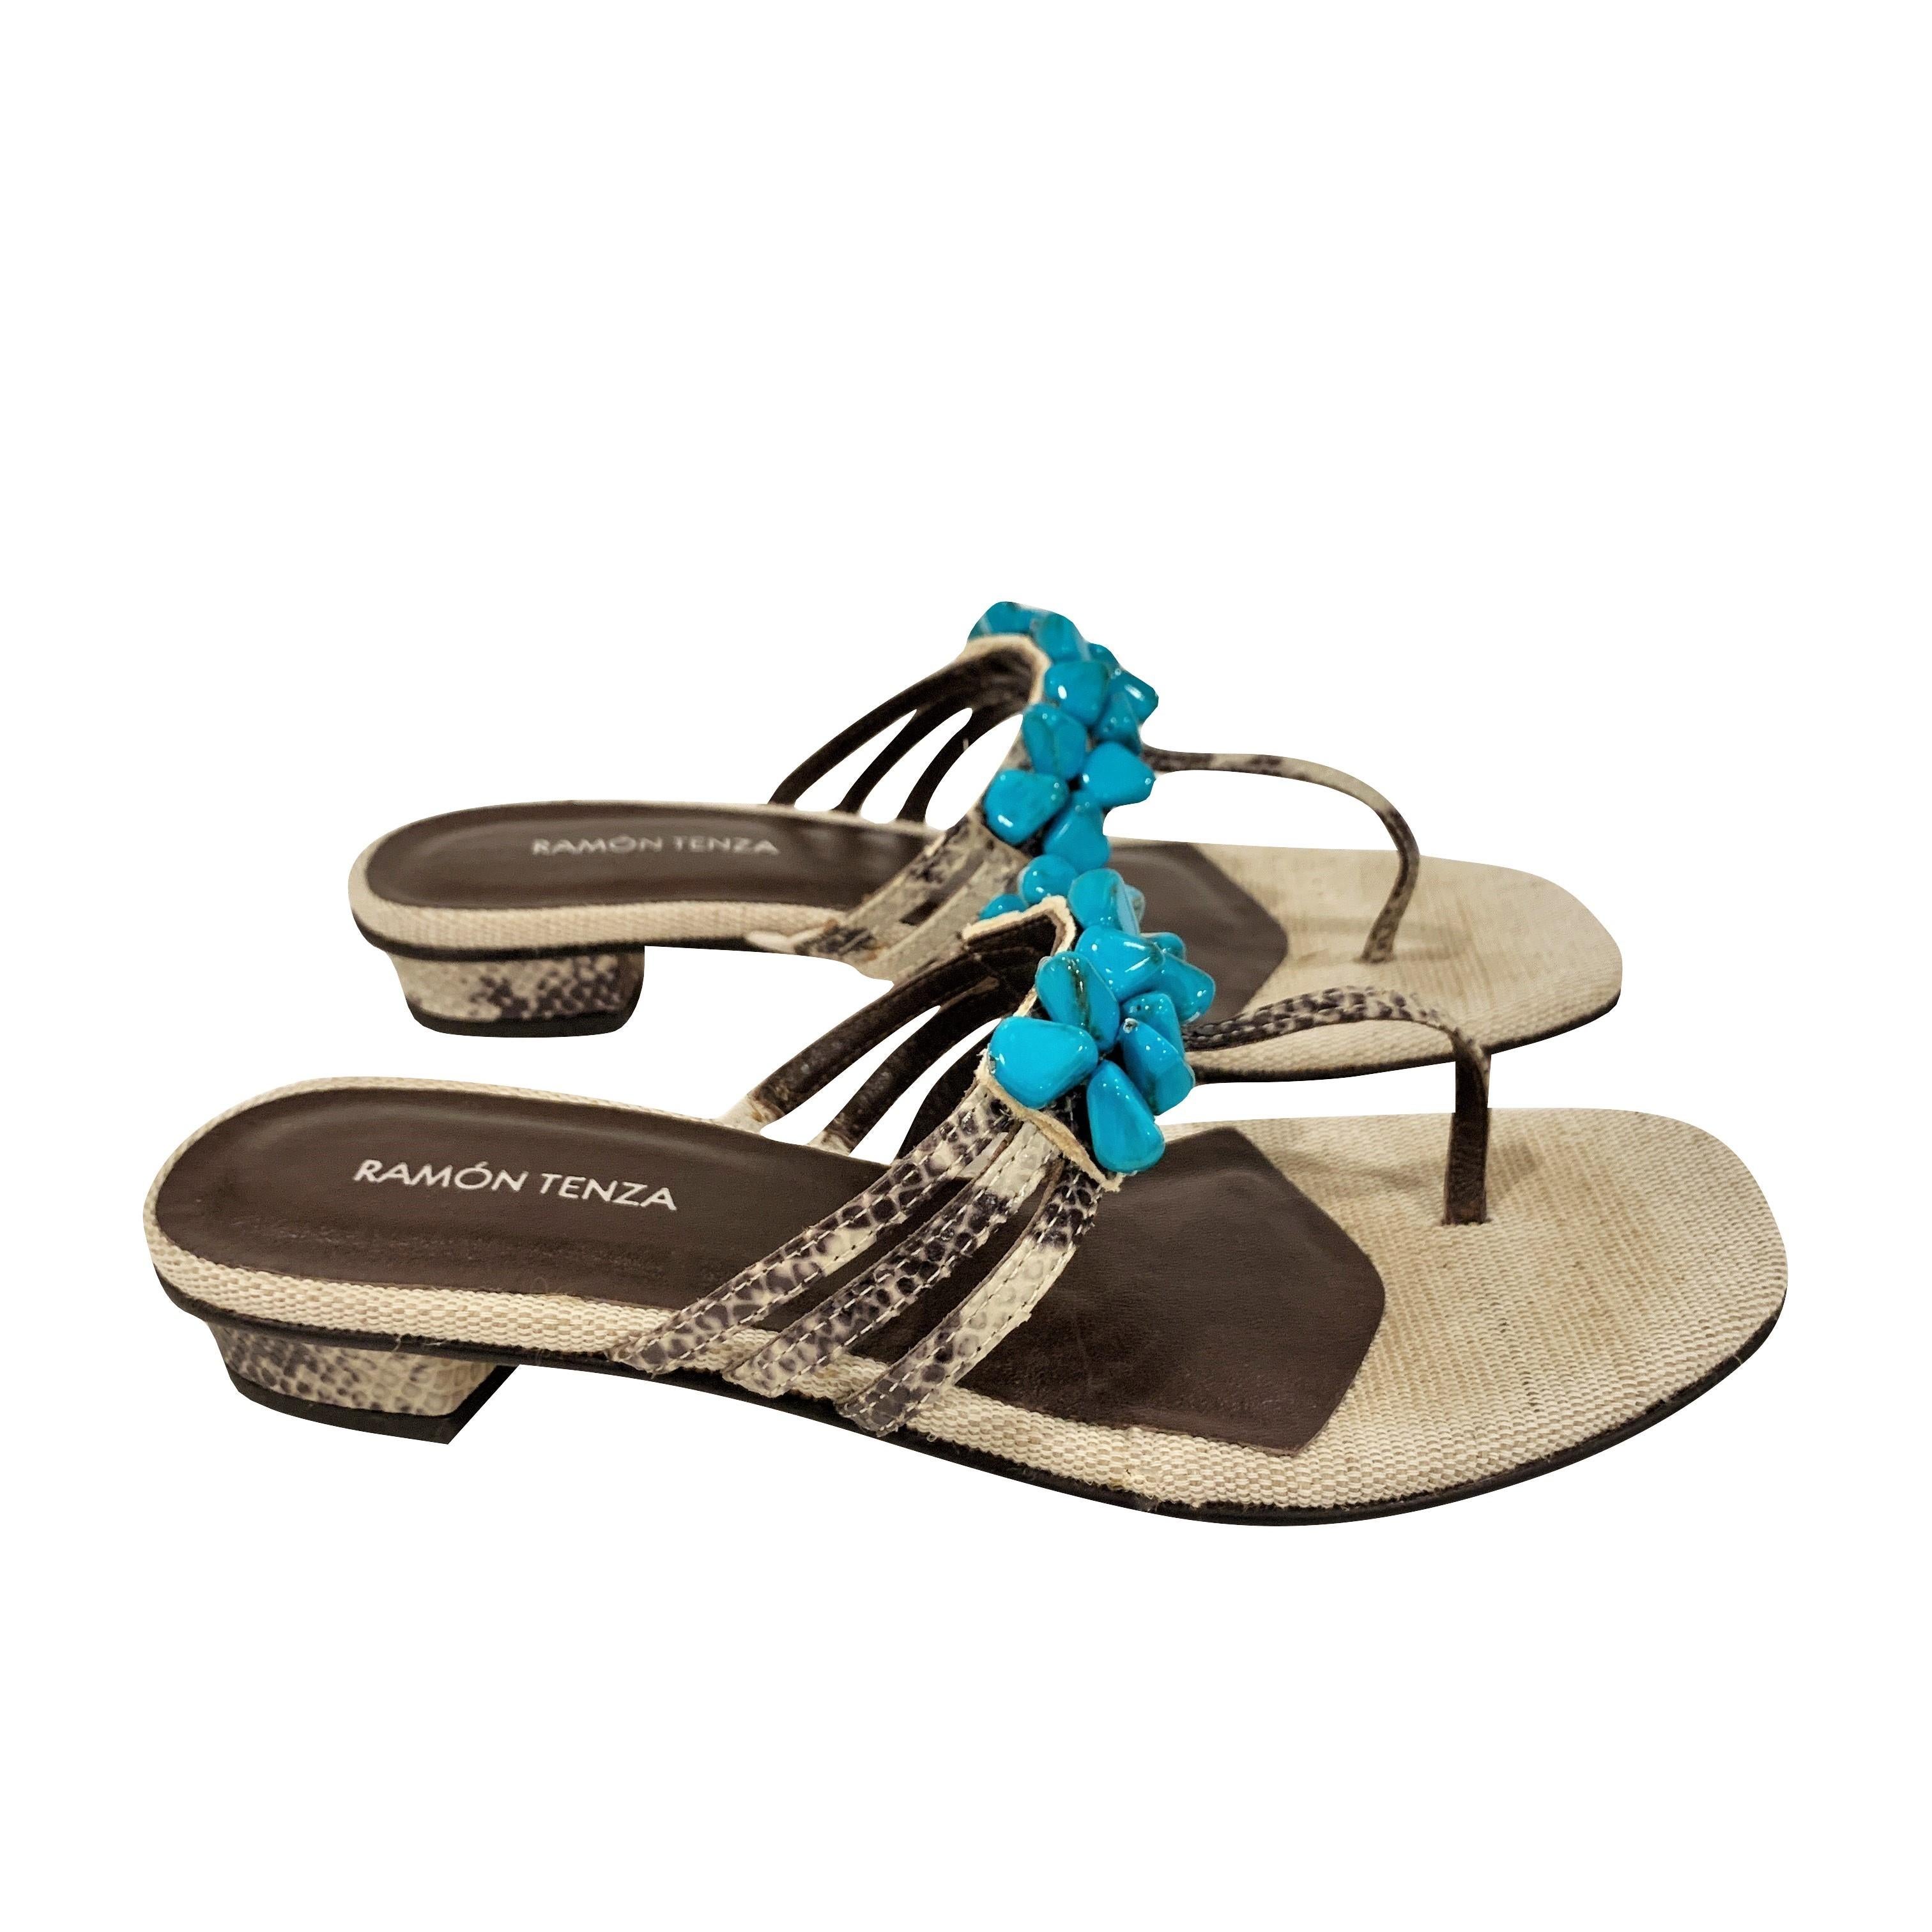 Ramon Tenza Spain
Brand New
Beige & Turquoise Thong Sandals
* Padded Leather Footbed
* Snakeskin Heel & Strap
* Faux Turquoise Beading
* Size: 9
* 1.25